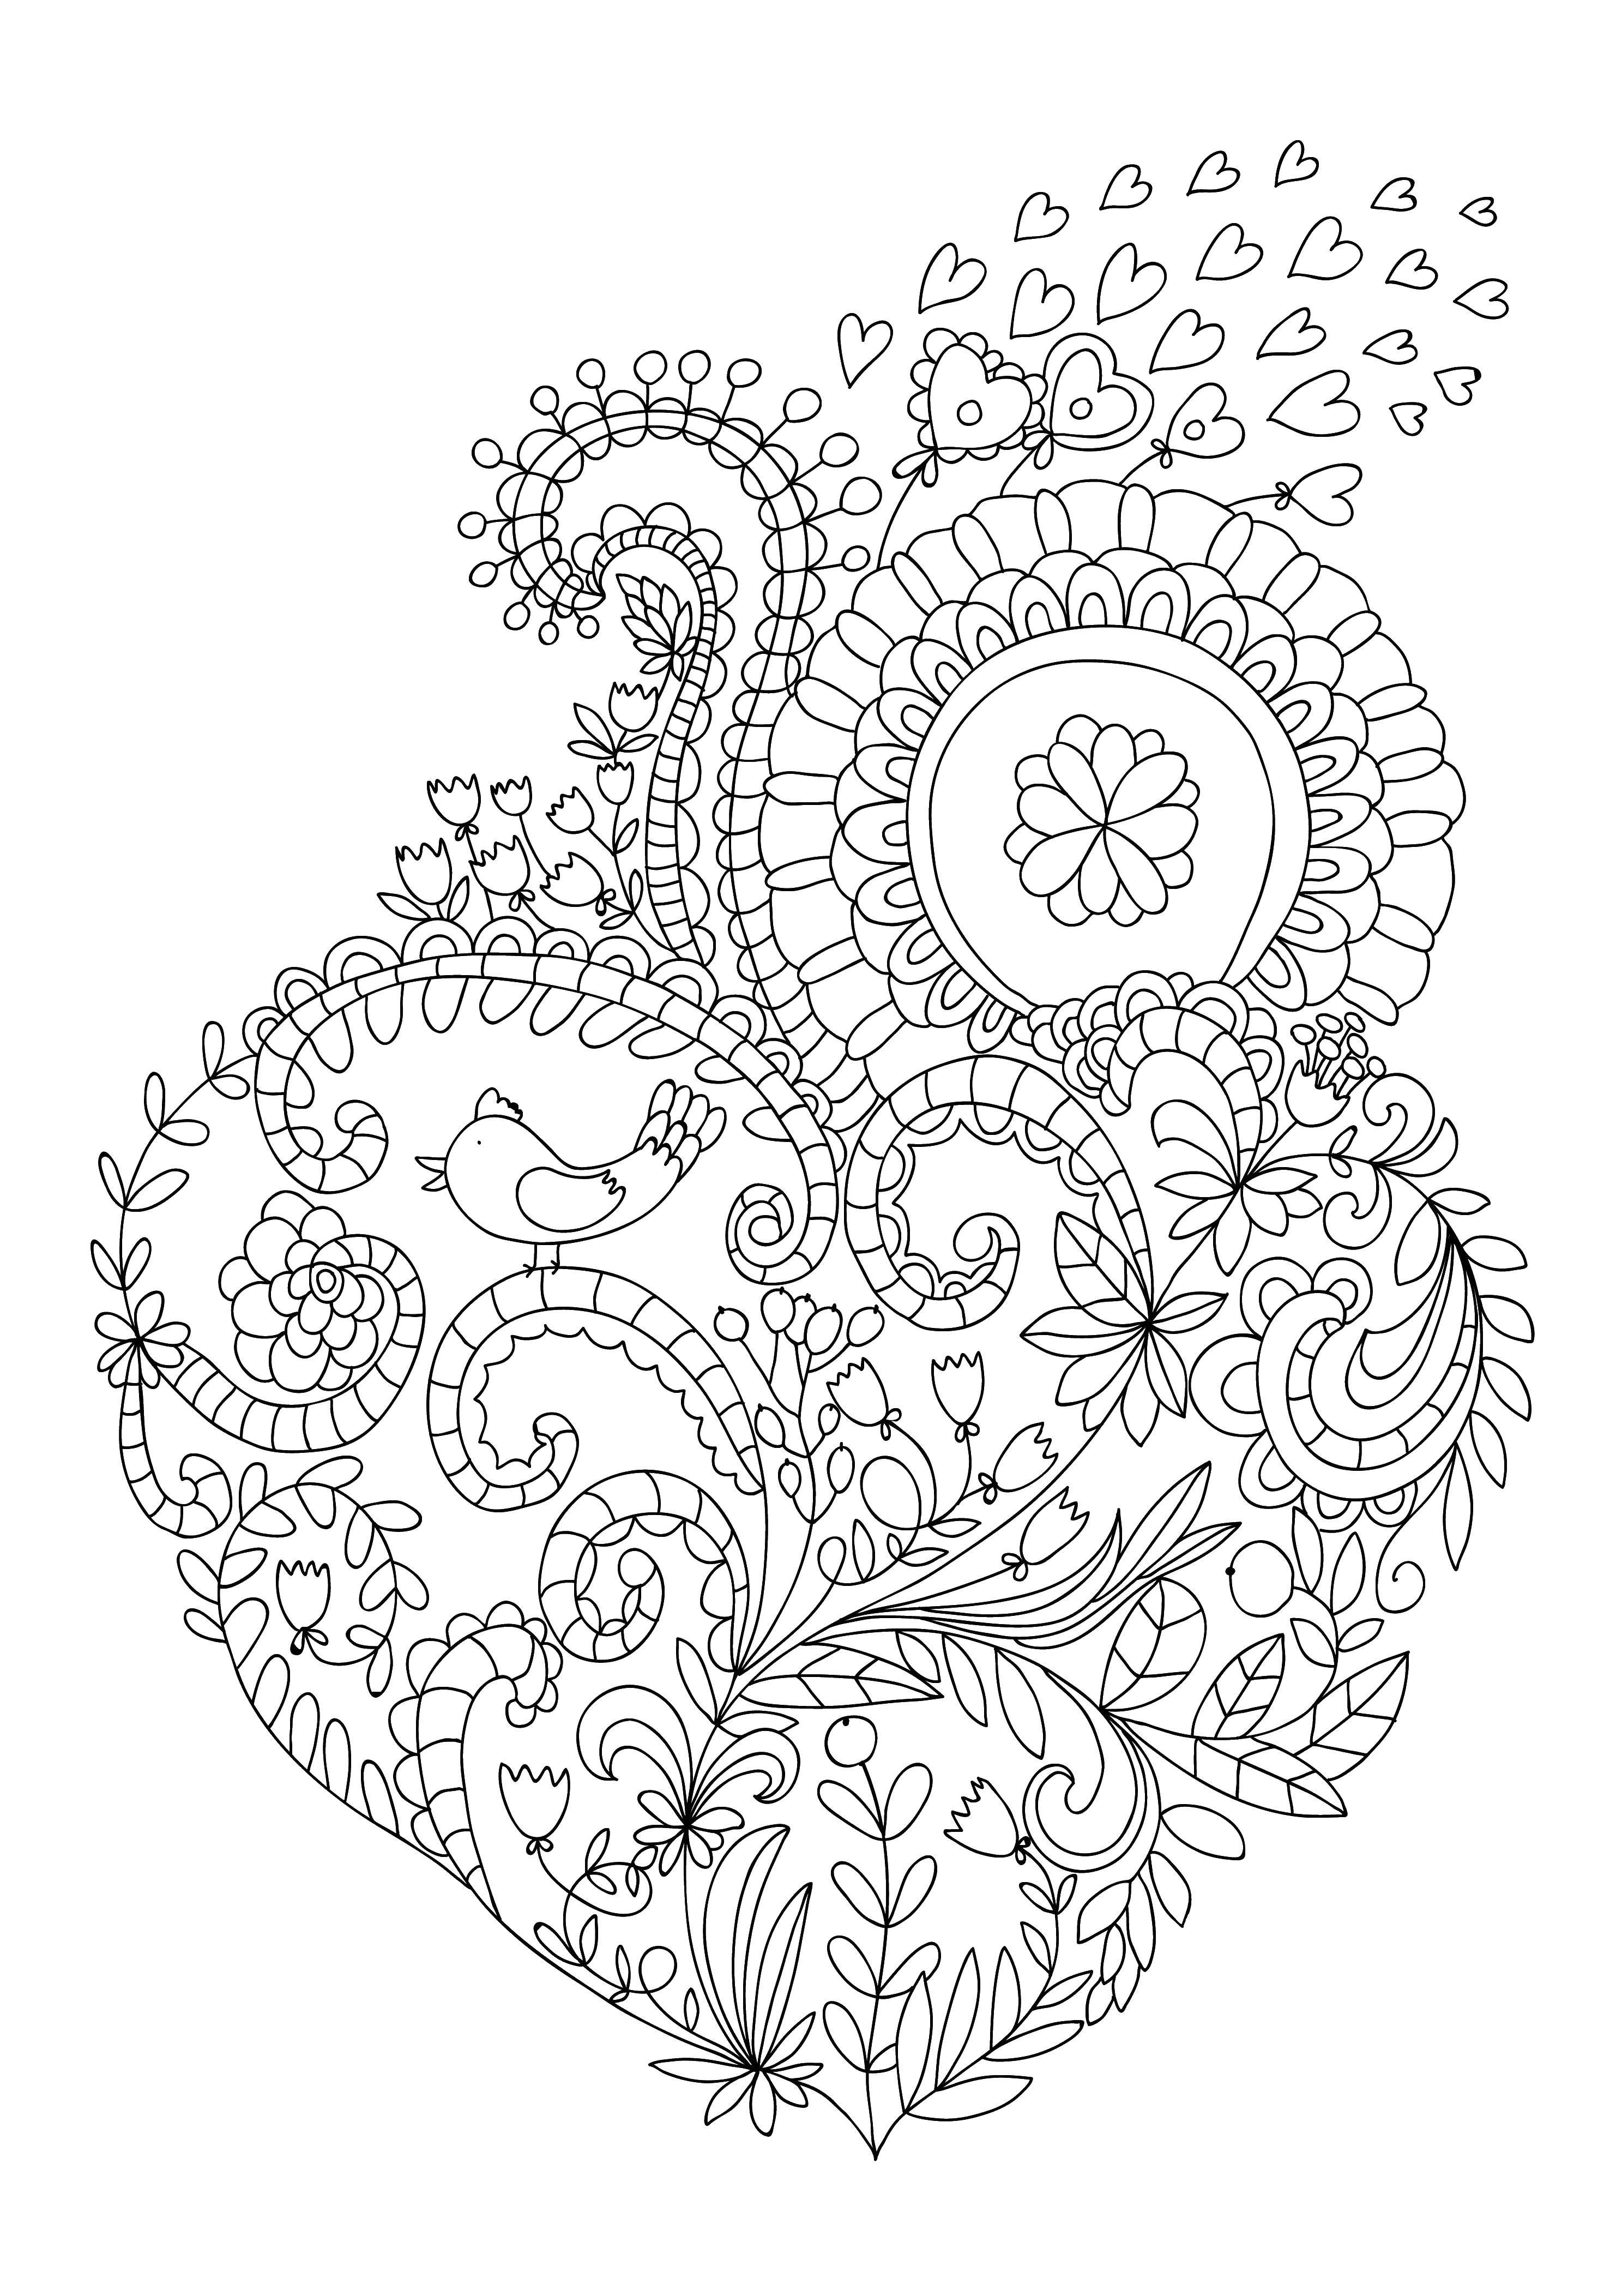 Coloring Anti-stress heart. Category coloring antistress. Tags:  anti-stress, heart.